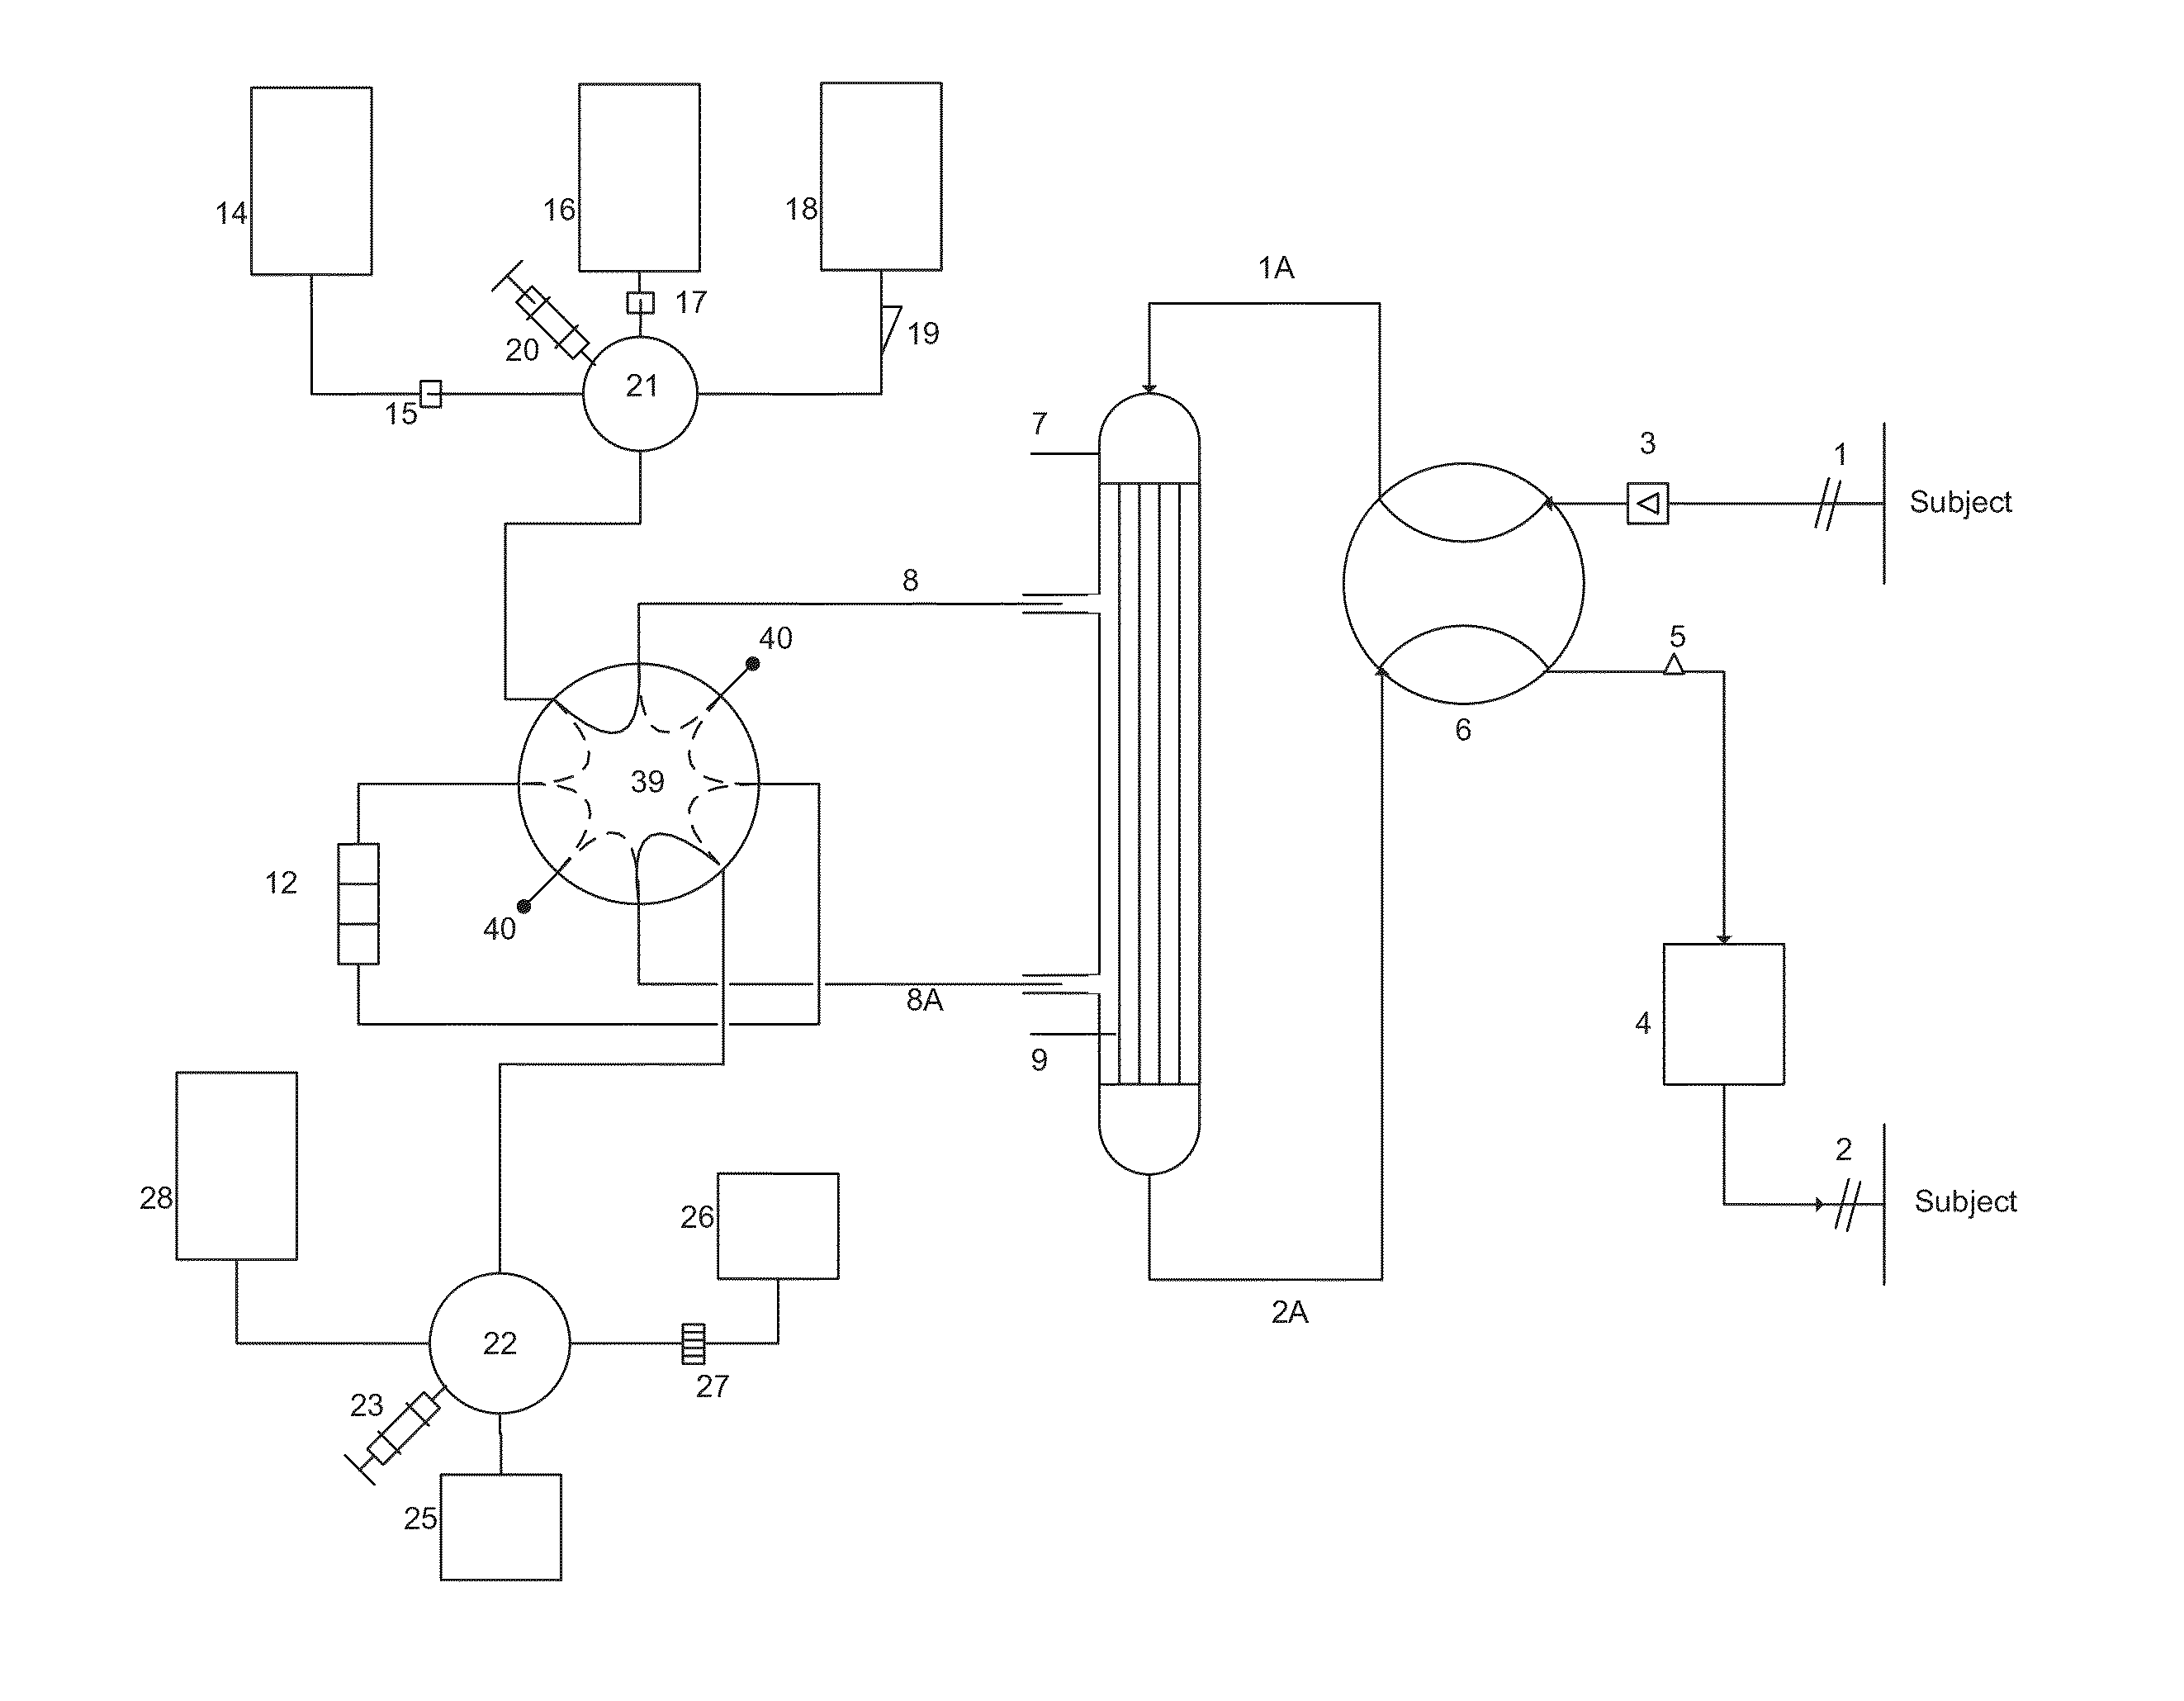 Closed-circuit device and methods for isolation, modification, and re-administration of specific constituents from a biological fluid source